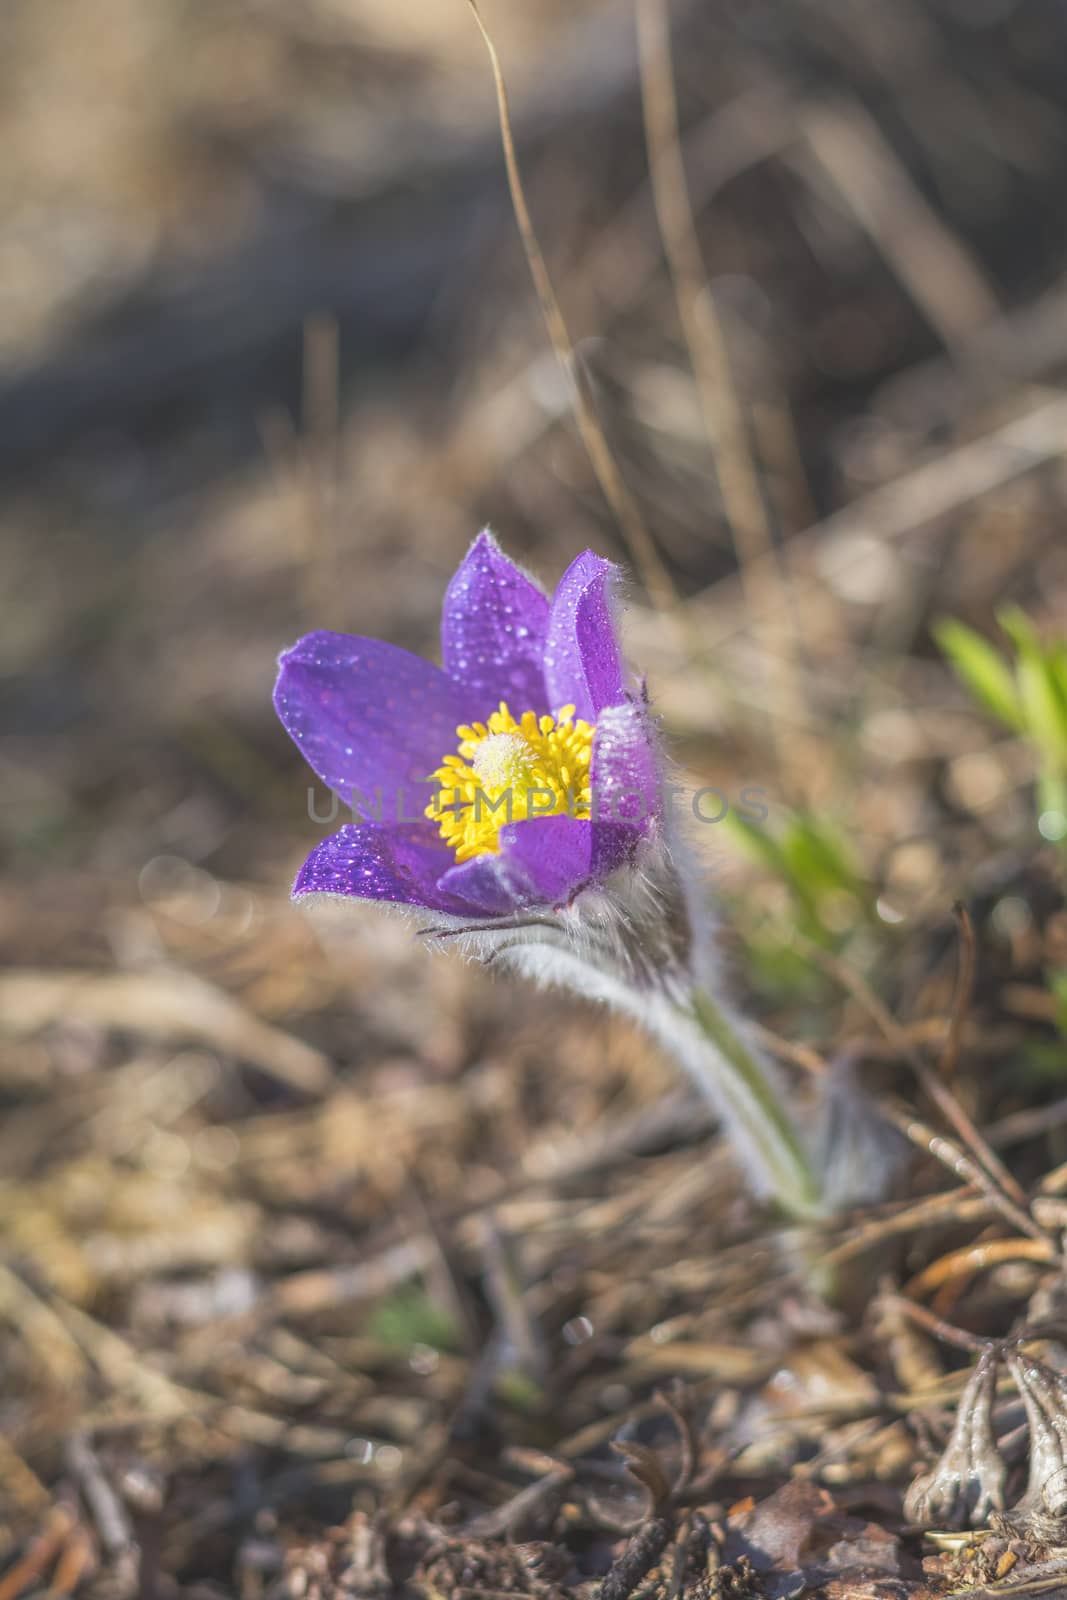 Eastern cutleaf anemone, pasque flower, prairie crocus whith drops of dew. Beautiful spring  violet flower. Shallow depth of field. Copy space.